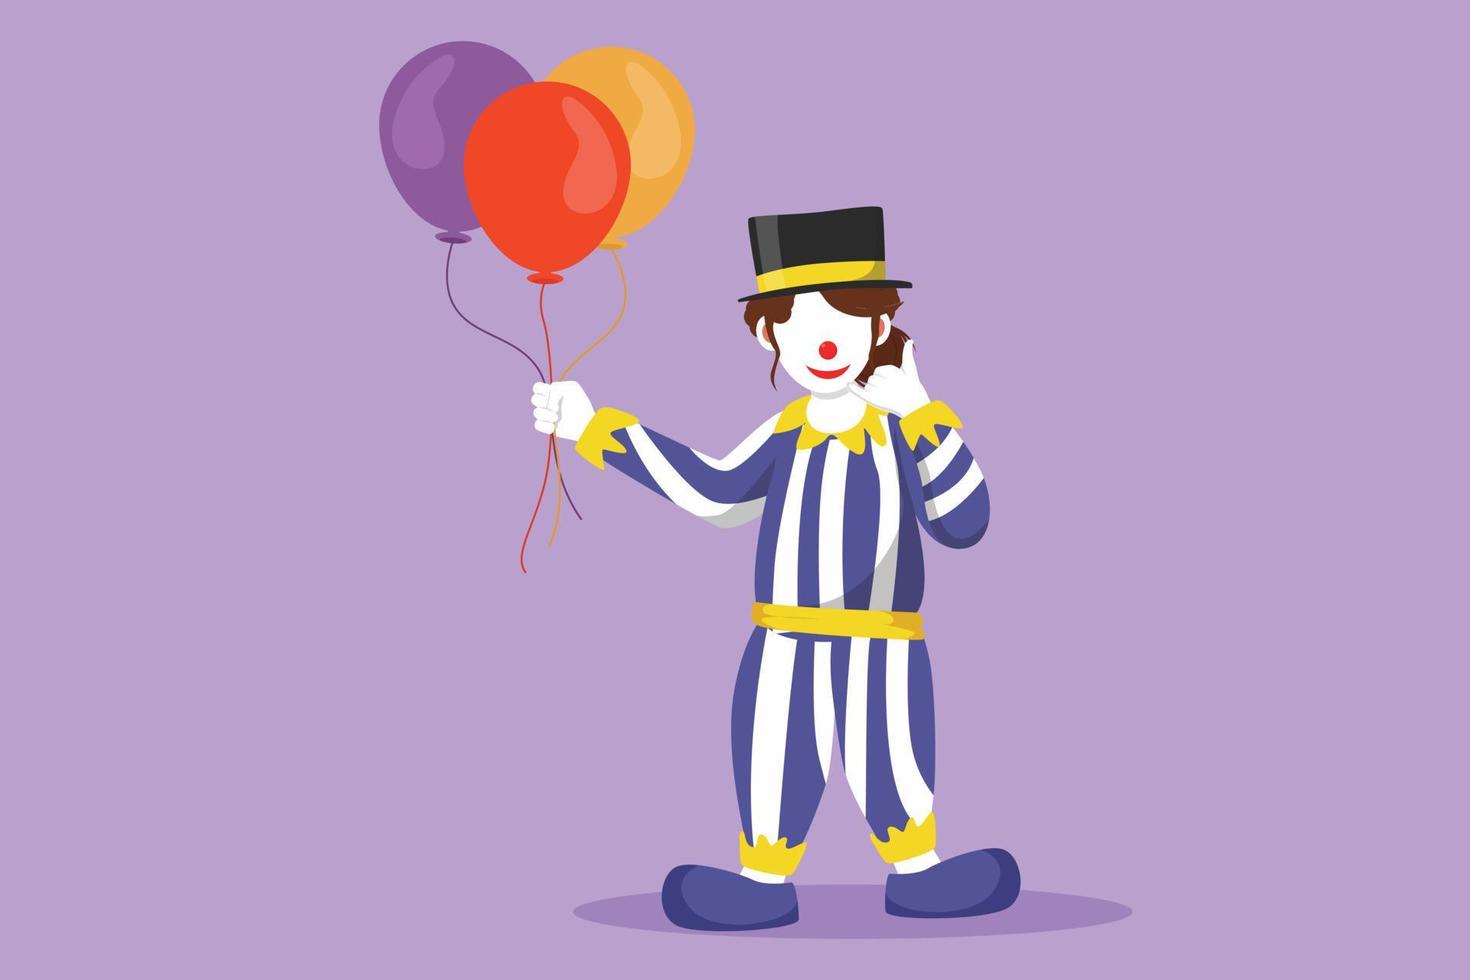 Cartoon flat style drawing female clown standing and holding balloon with call me gesture, wearing hat and clown costume ready to entertain audience in circus arena. Graphic design vector illustration